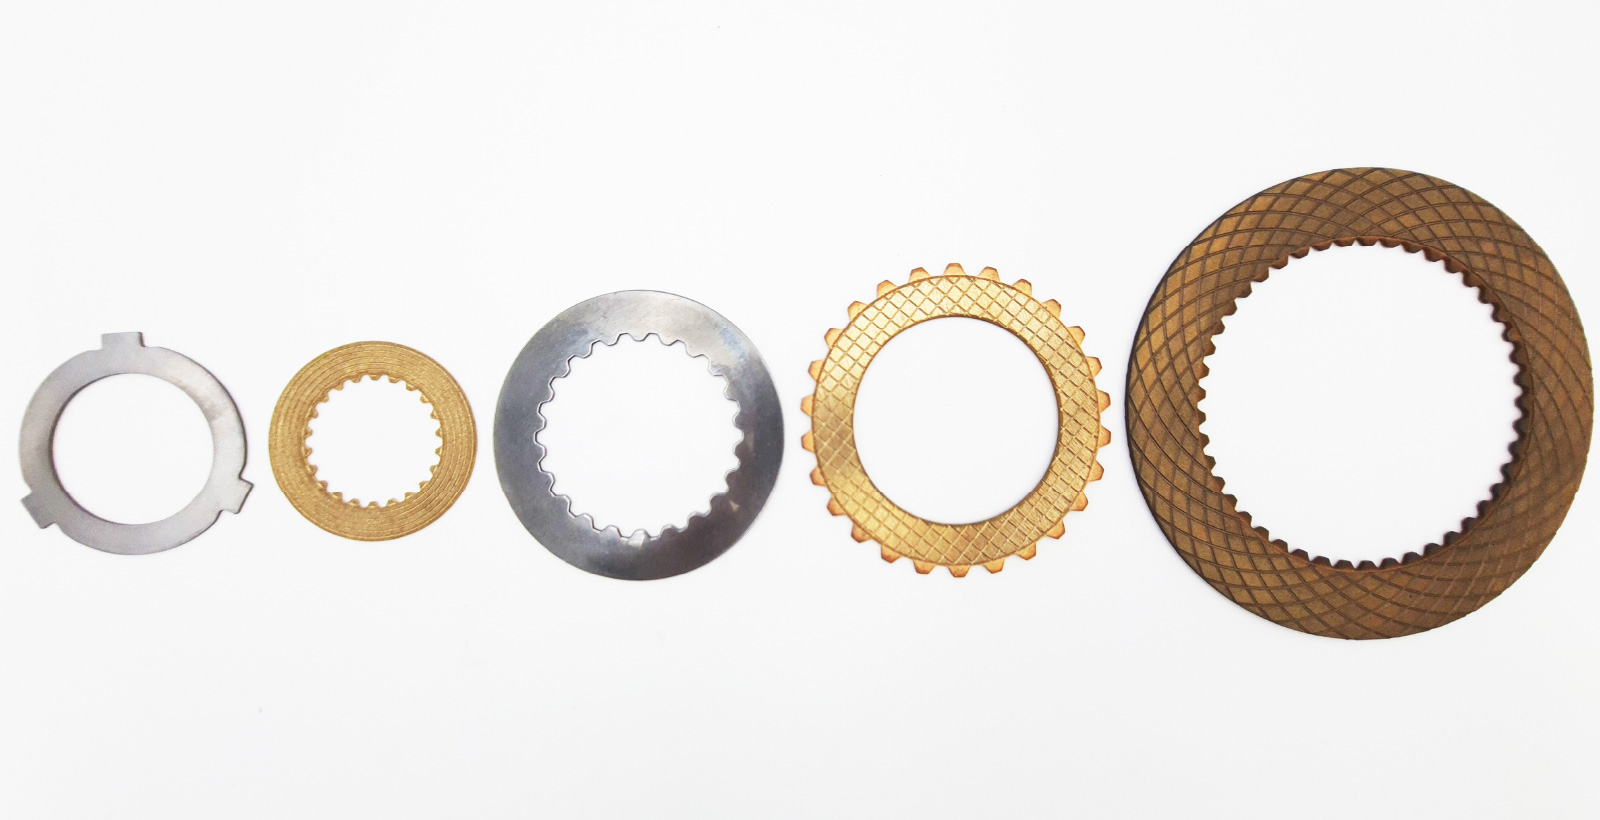 Bronze Transmission Discs for Maritime Industry